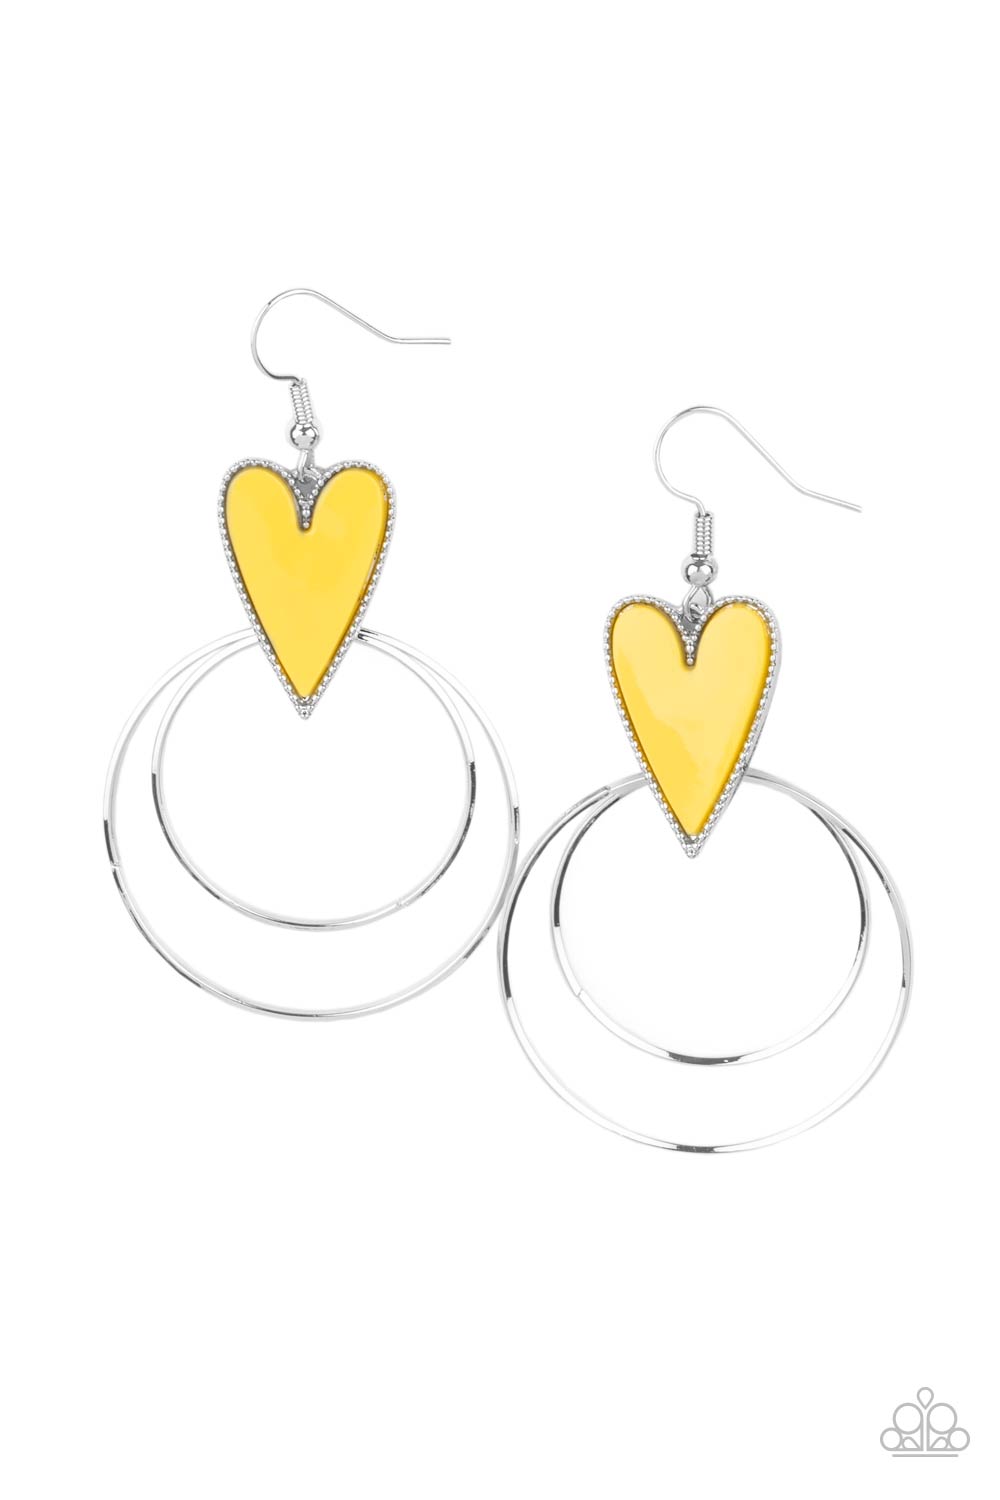 Paparazzi Accessories - Happily Ever Hearts #E507 - Yellow Earrings